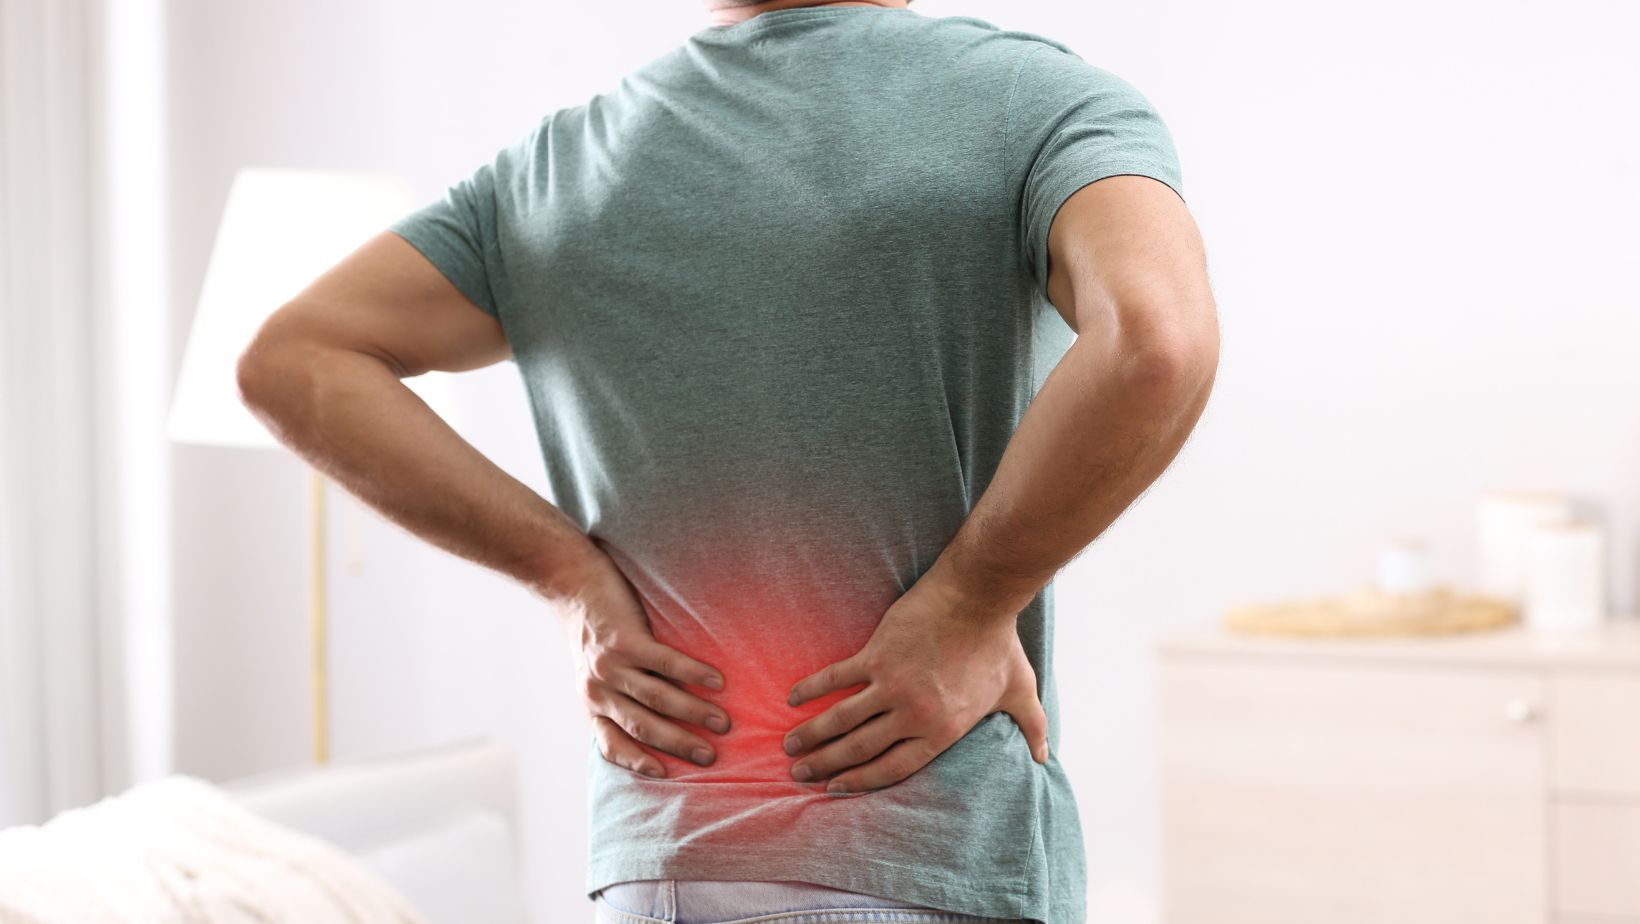 lower backpain cause by vitamin deficiency